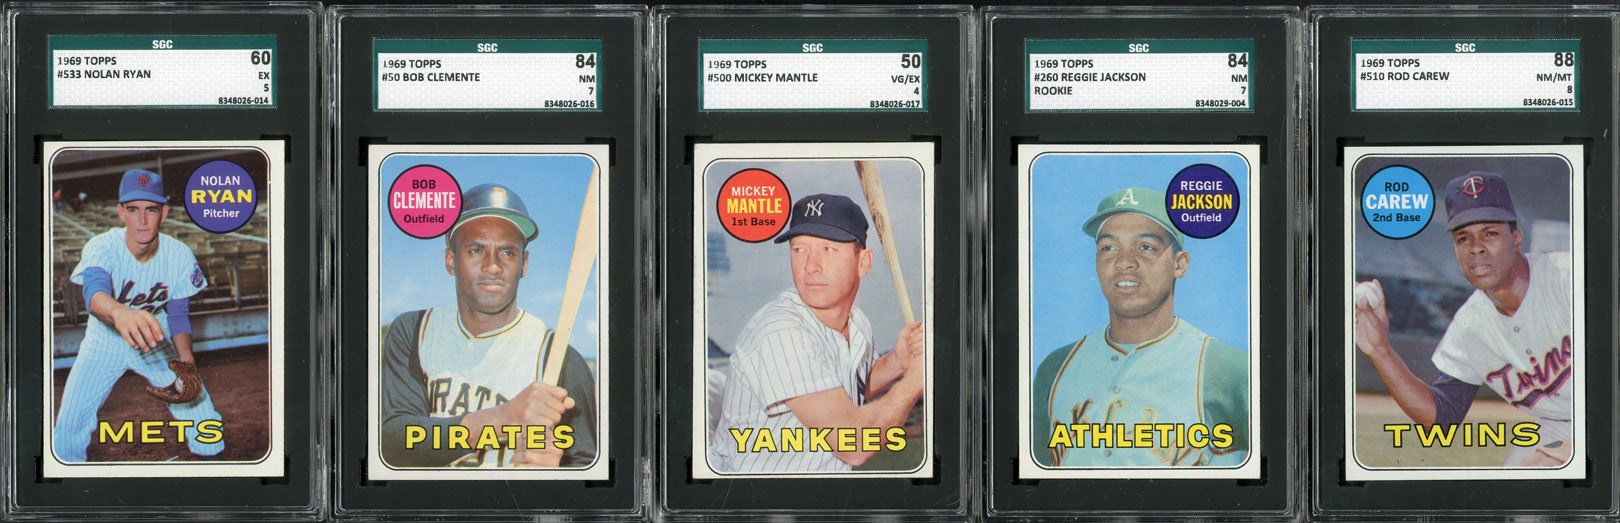 - 1969 Topps HIGH GRADE Complete Set (664 Cards - 5 SGC Graded)